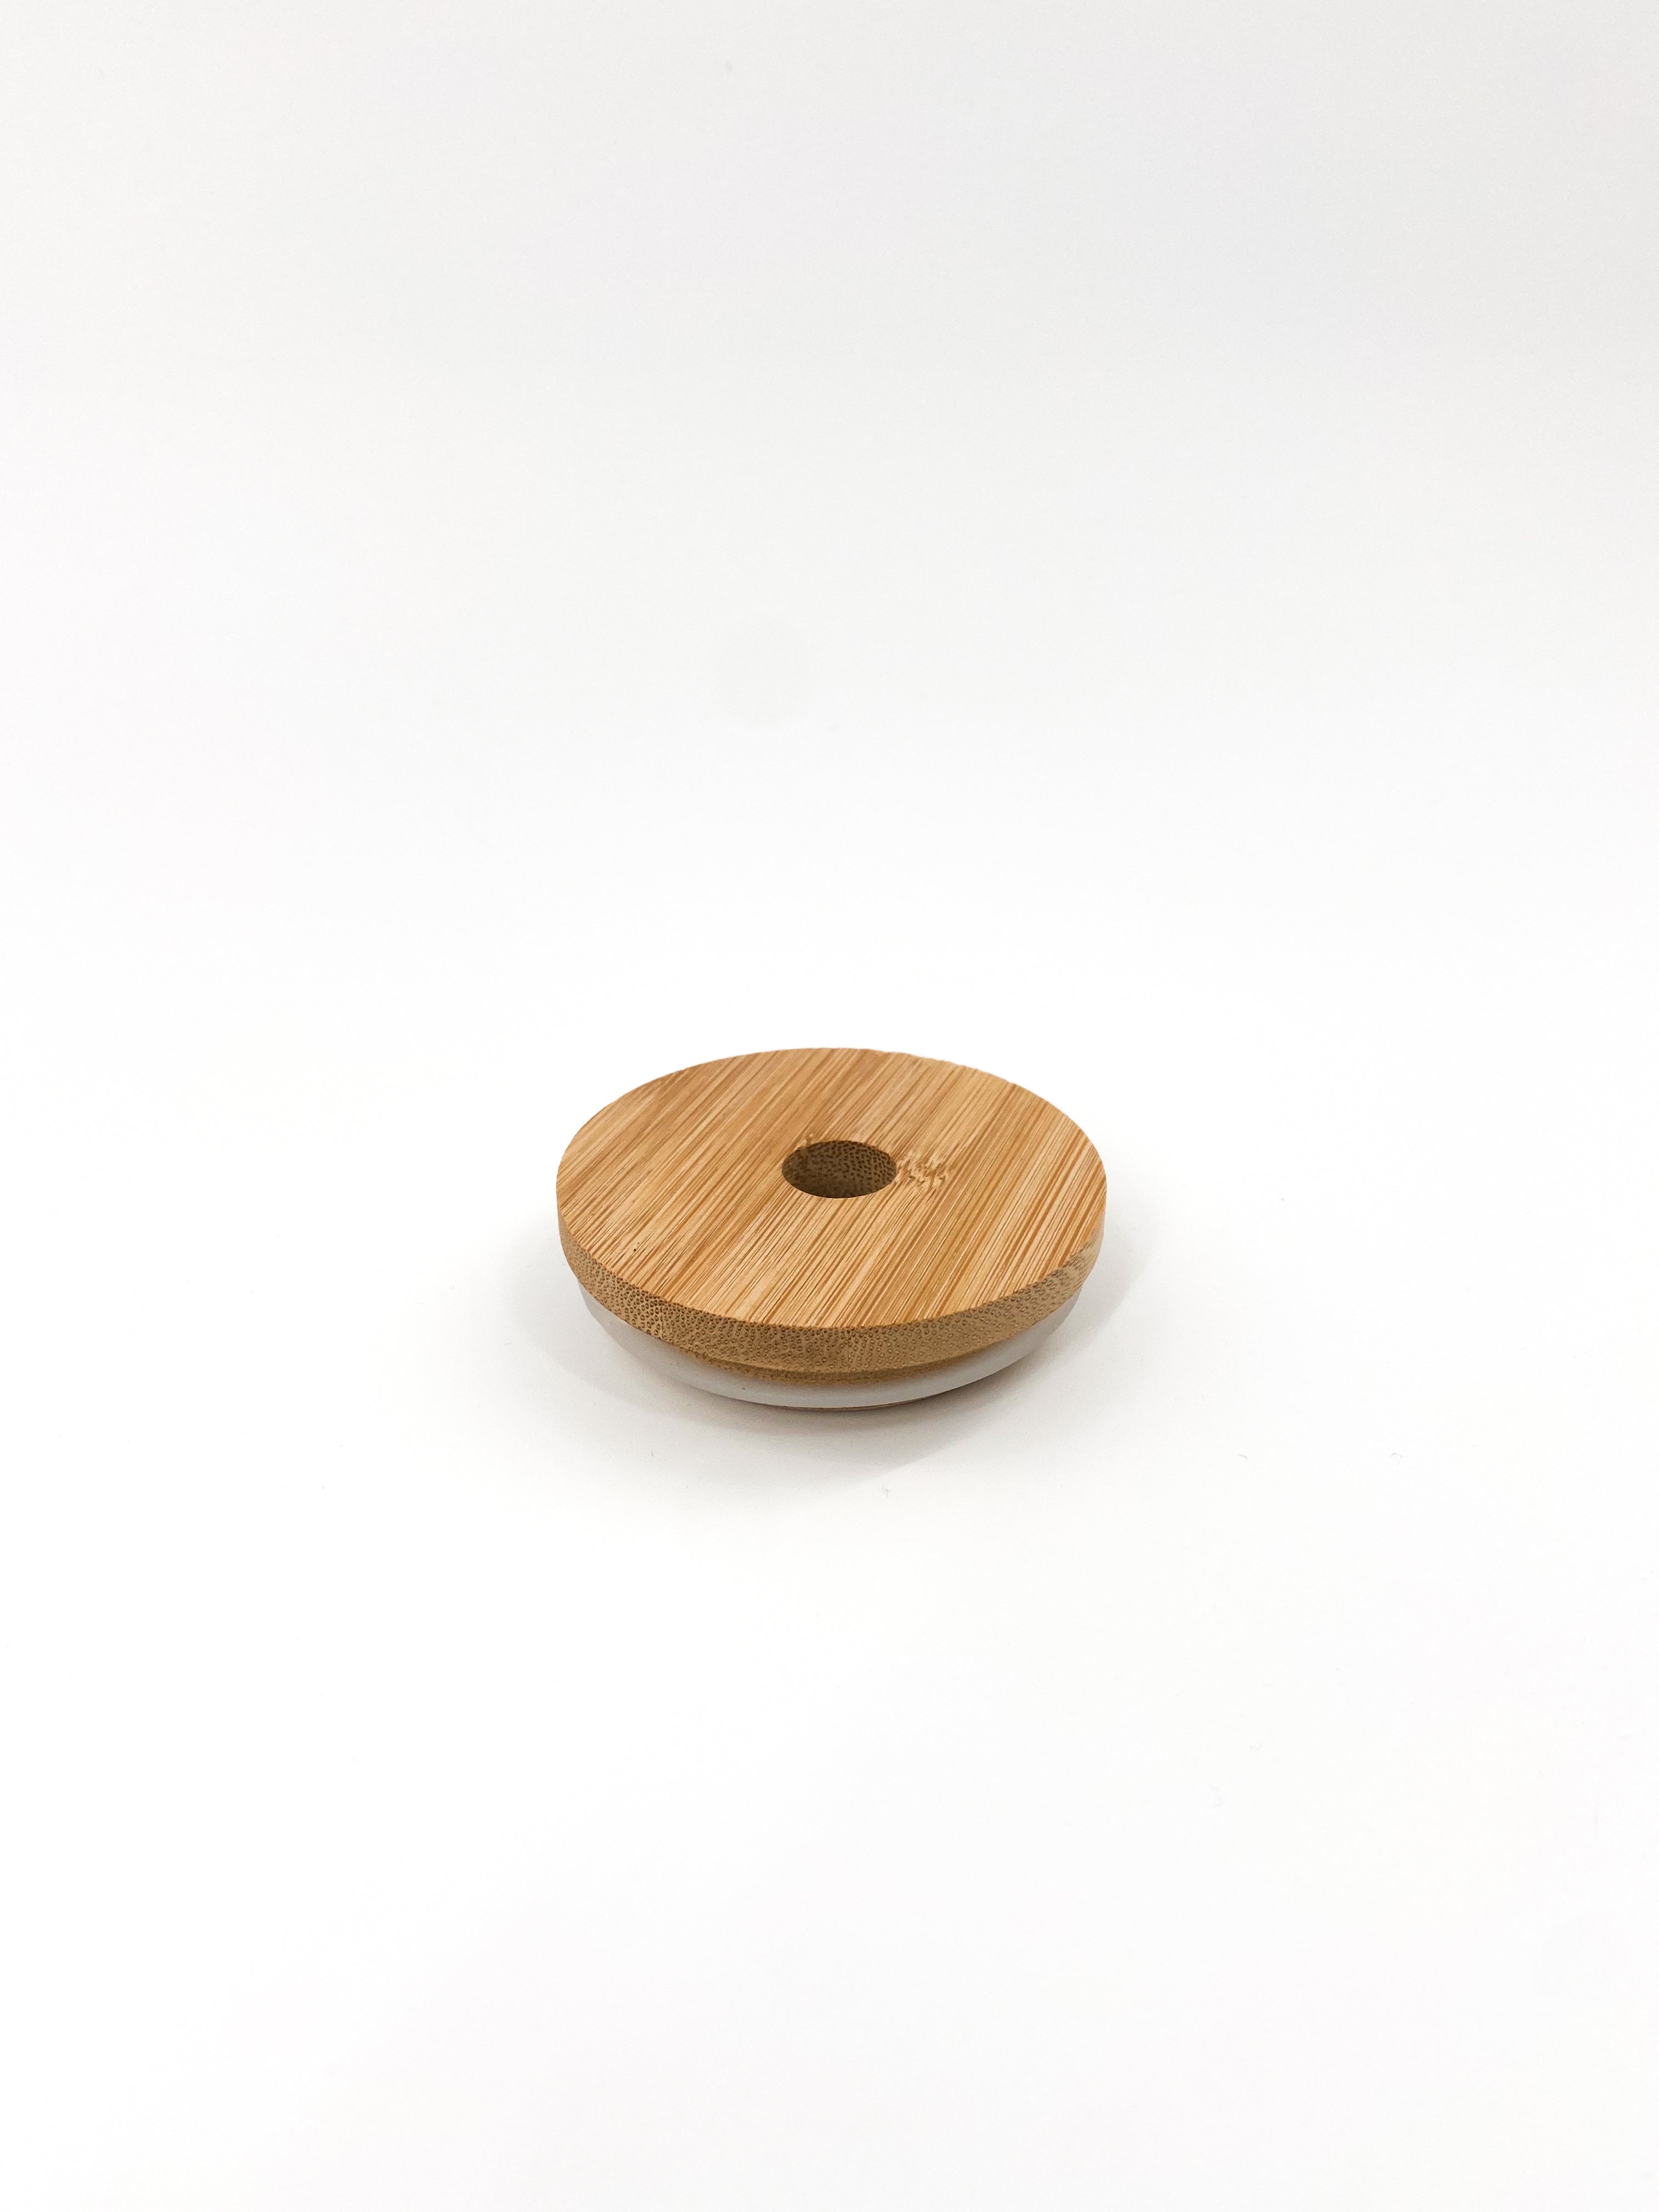 bamboo lid for can glass